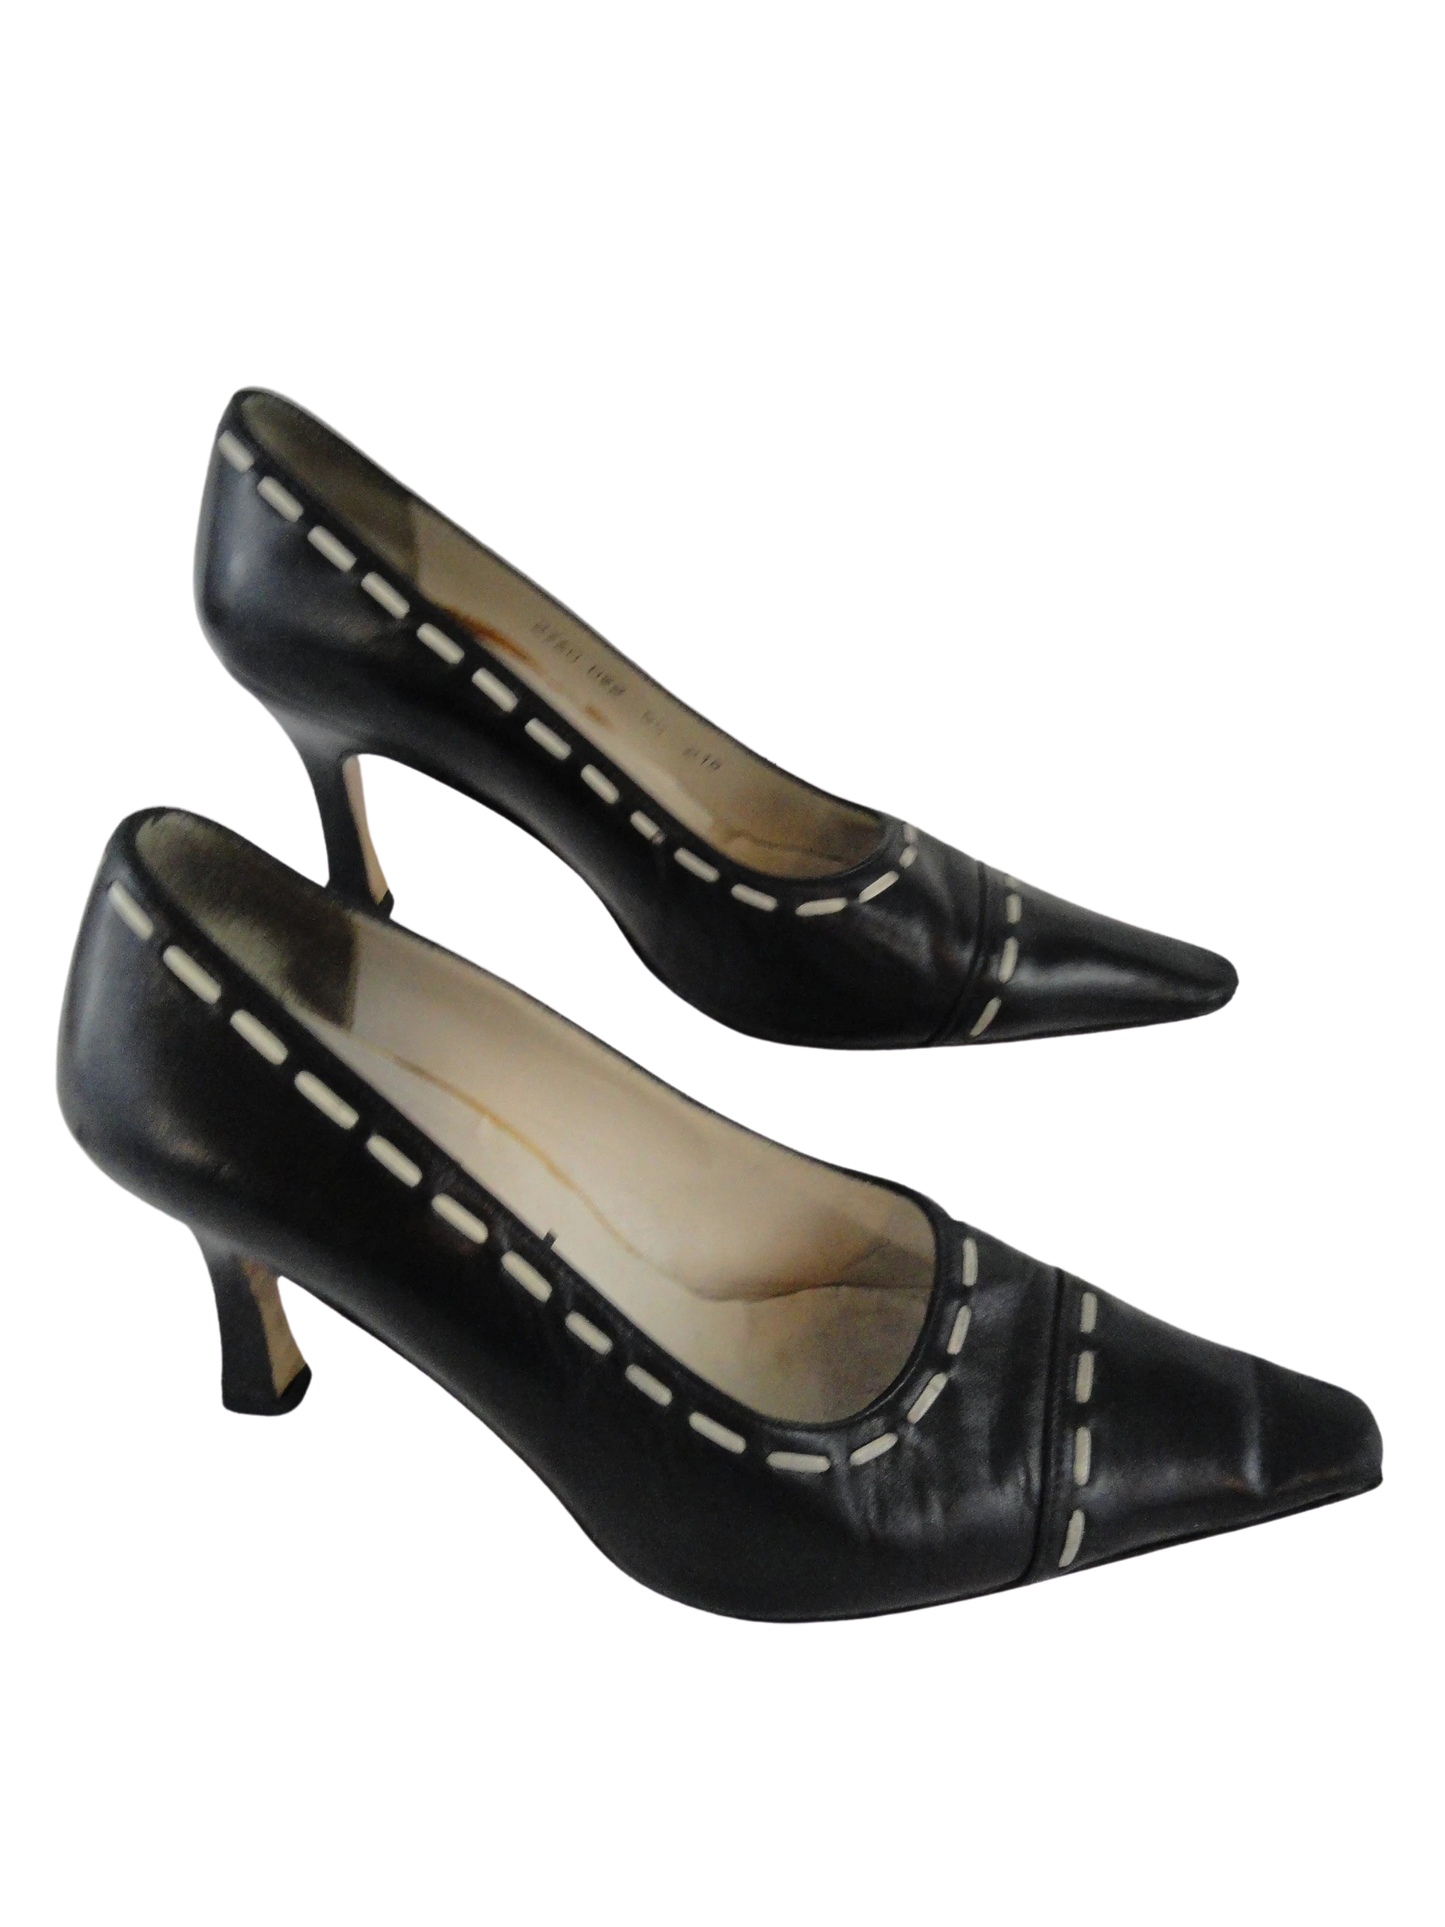 Dolly Duz High Heels Black Leather and White Leather Laced Size 5-1/2 SKU 000277-1